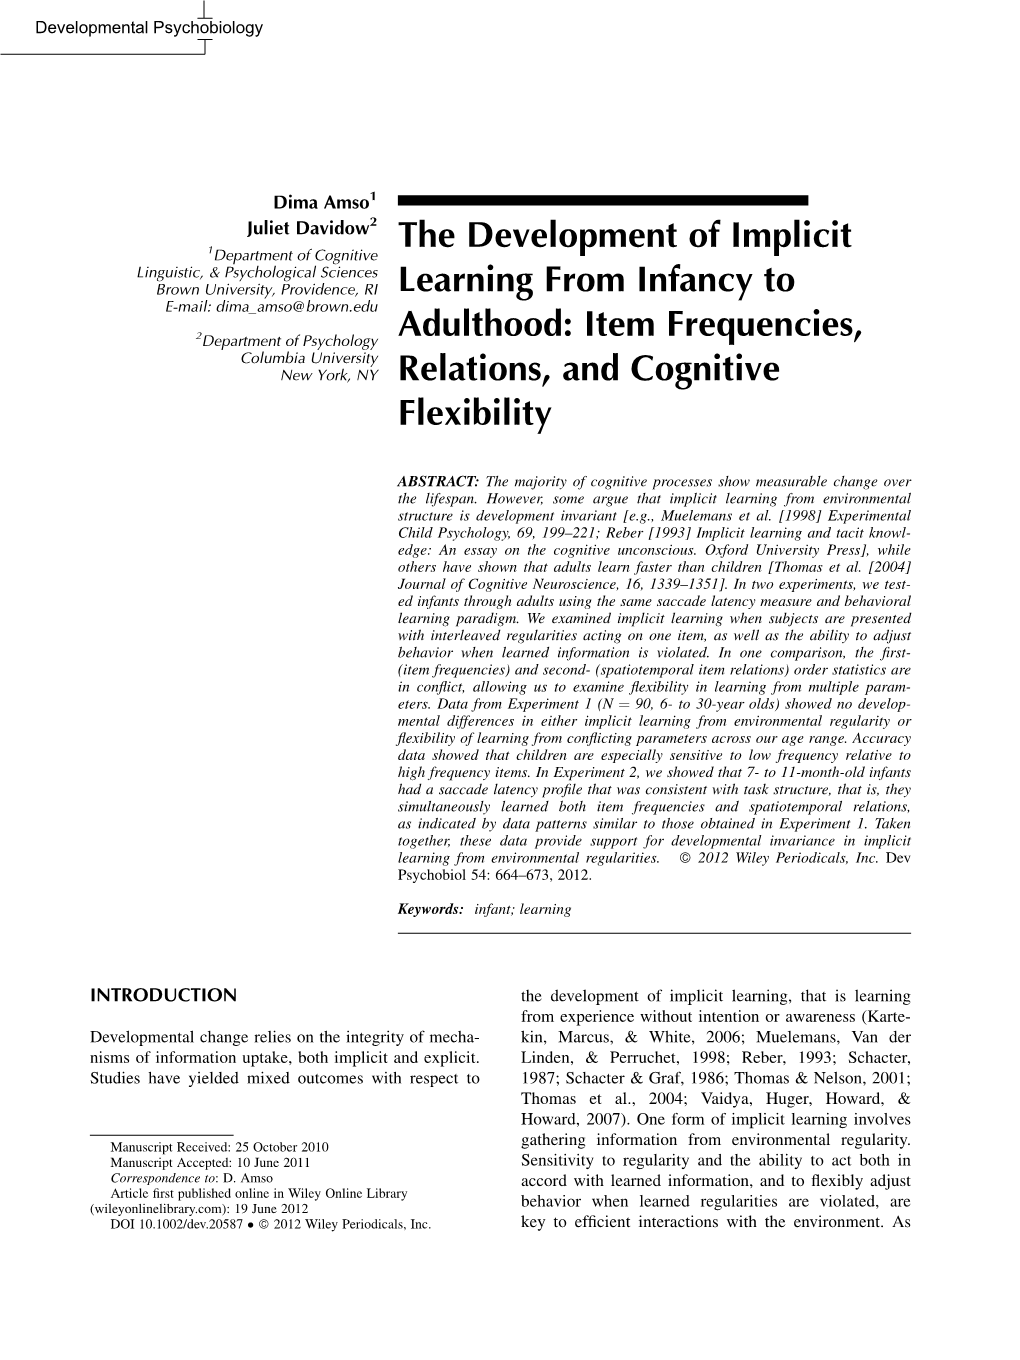 The Development of Implicit Learning from Infancy to Adulthood: Item